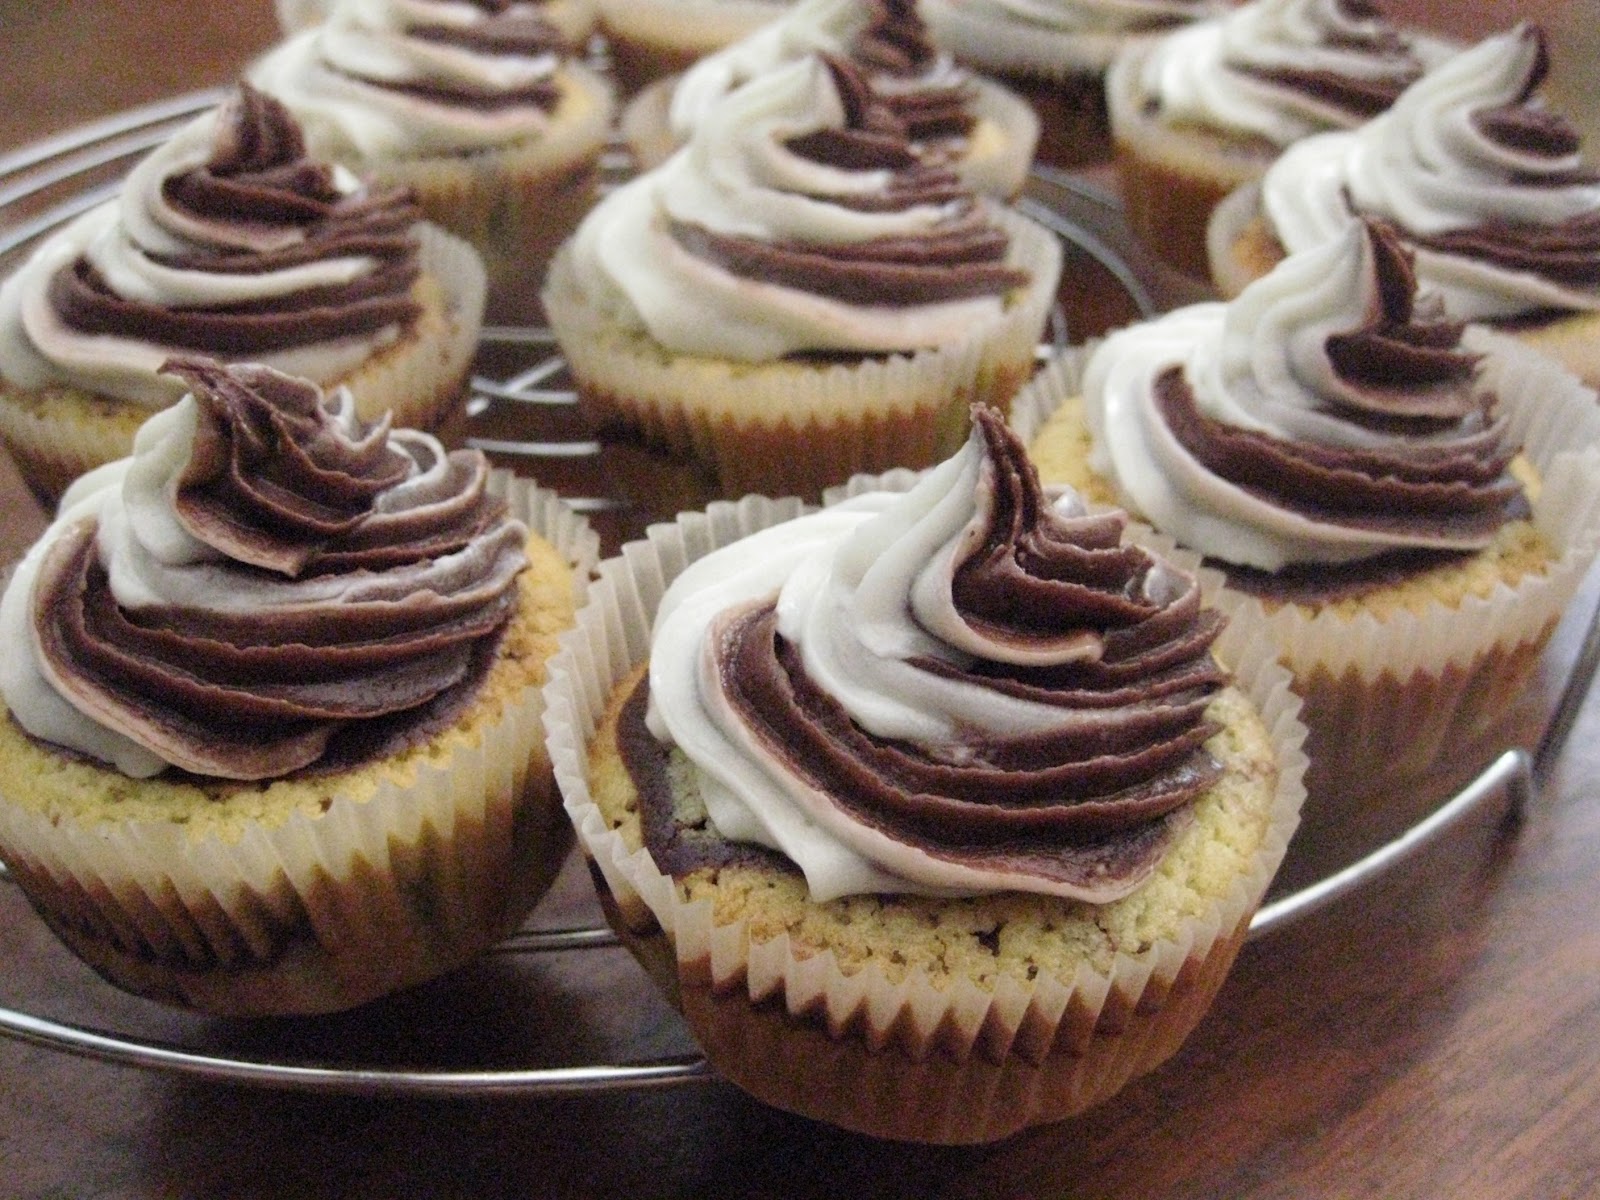 of Cookies &amp; Cakes: Zebra cupcakes with vanilla and chocolate buttercream